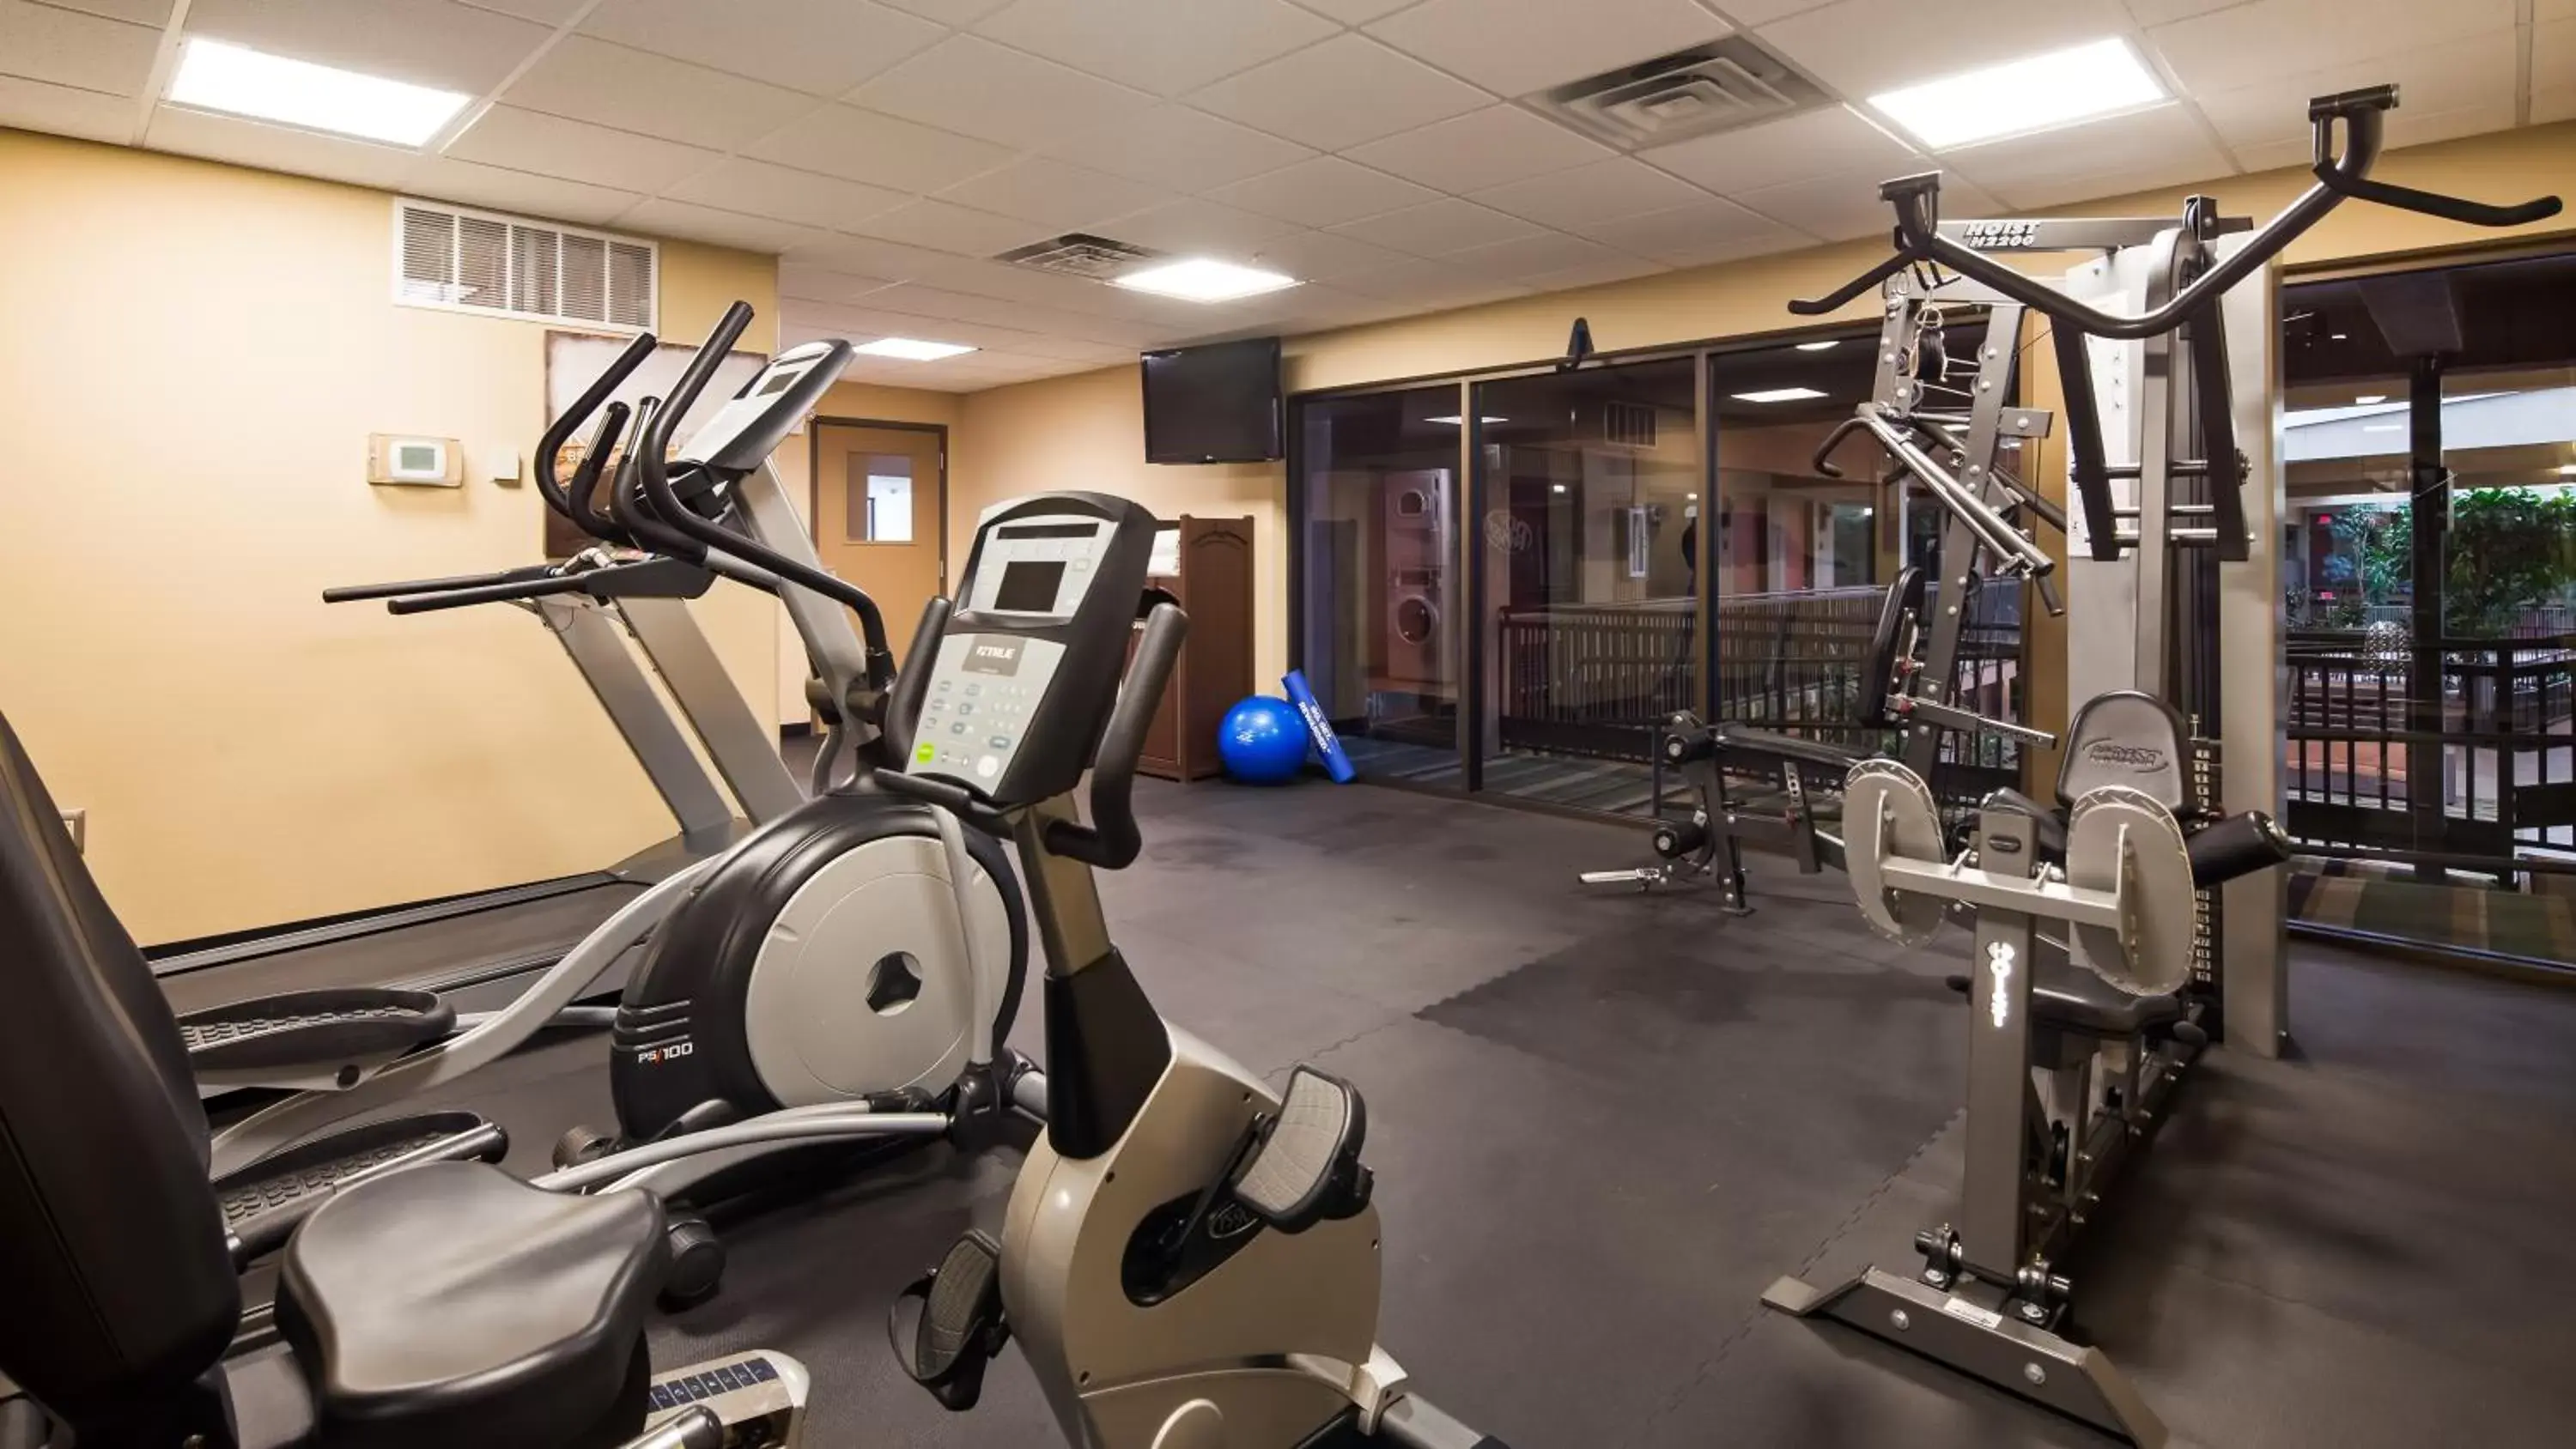 Fitness centre/facilities, Fitness Center/Facilities in Best Western Plus Raton Hotel